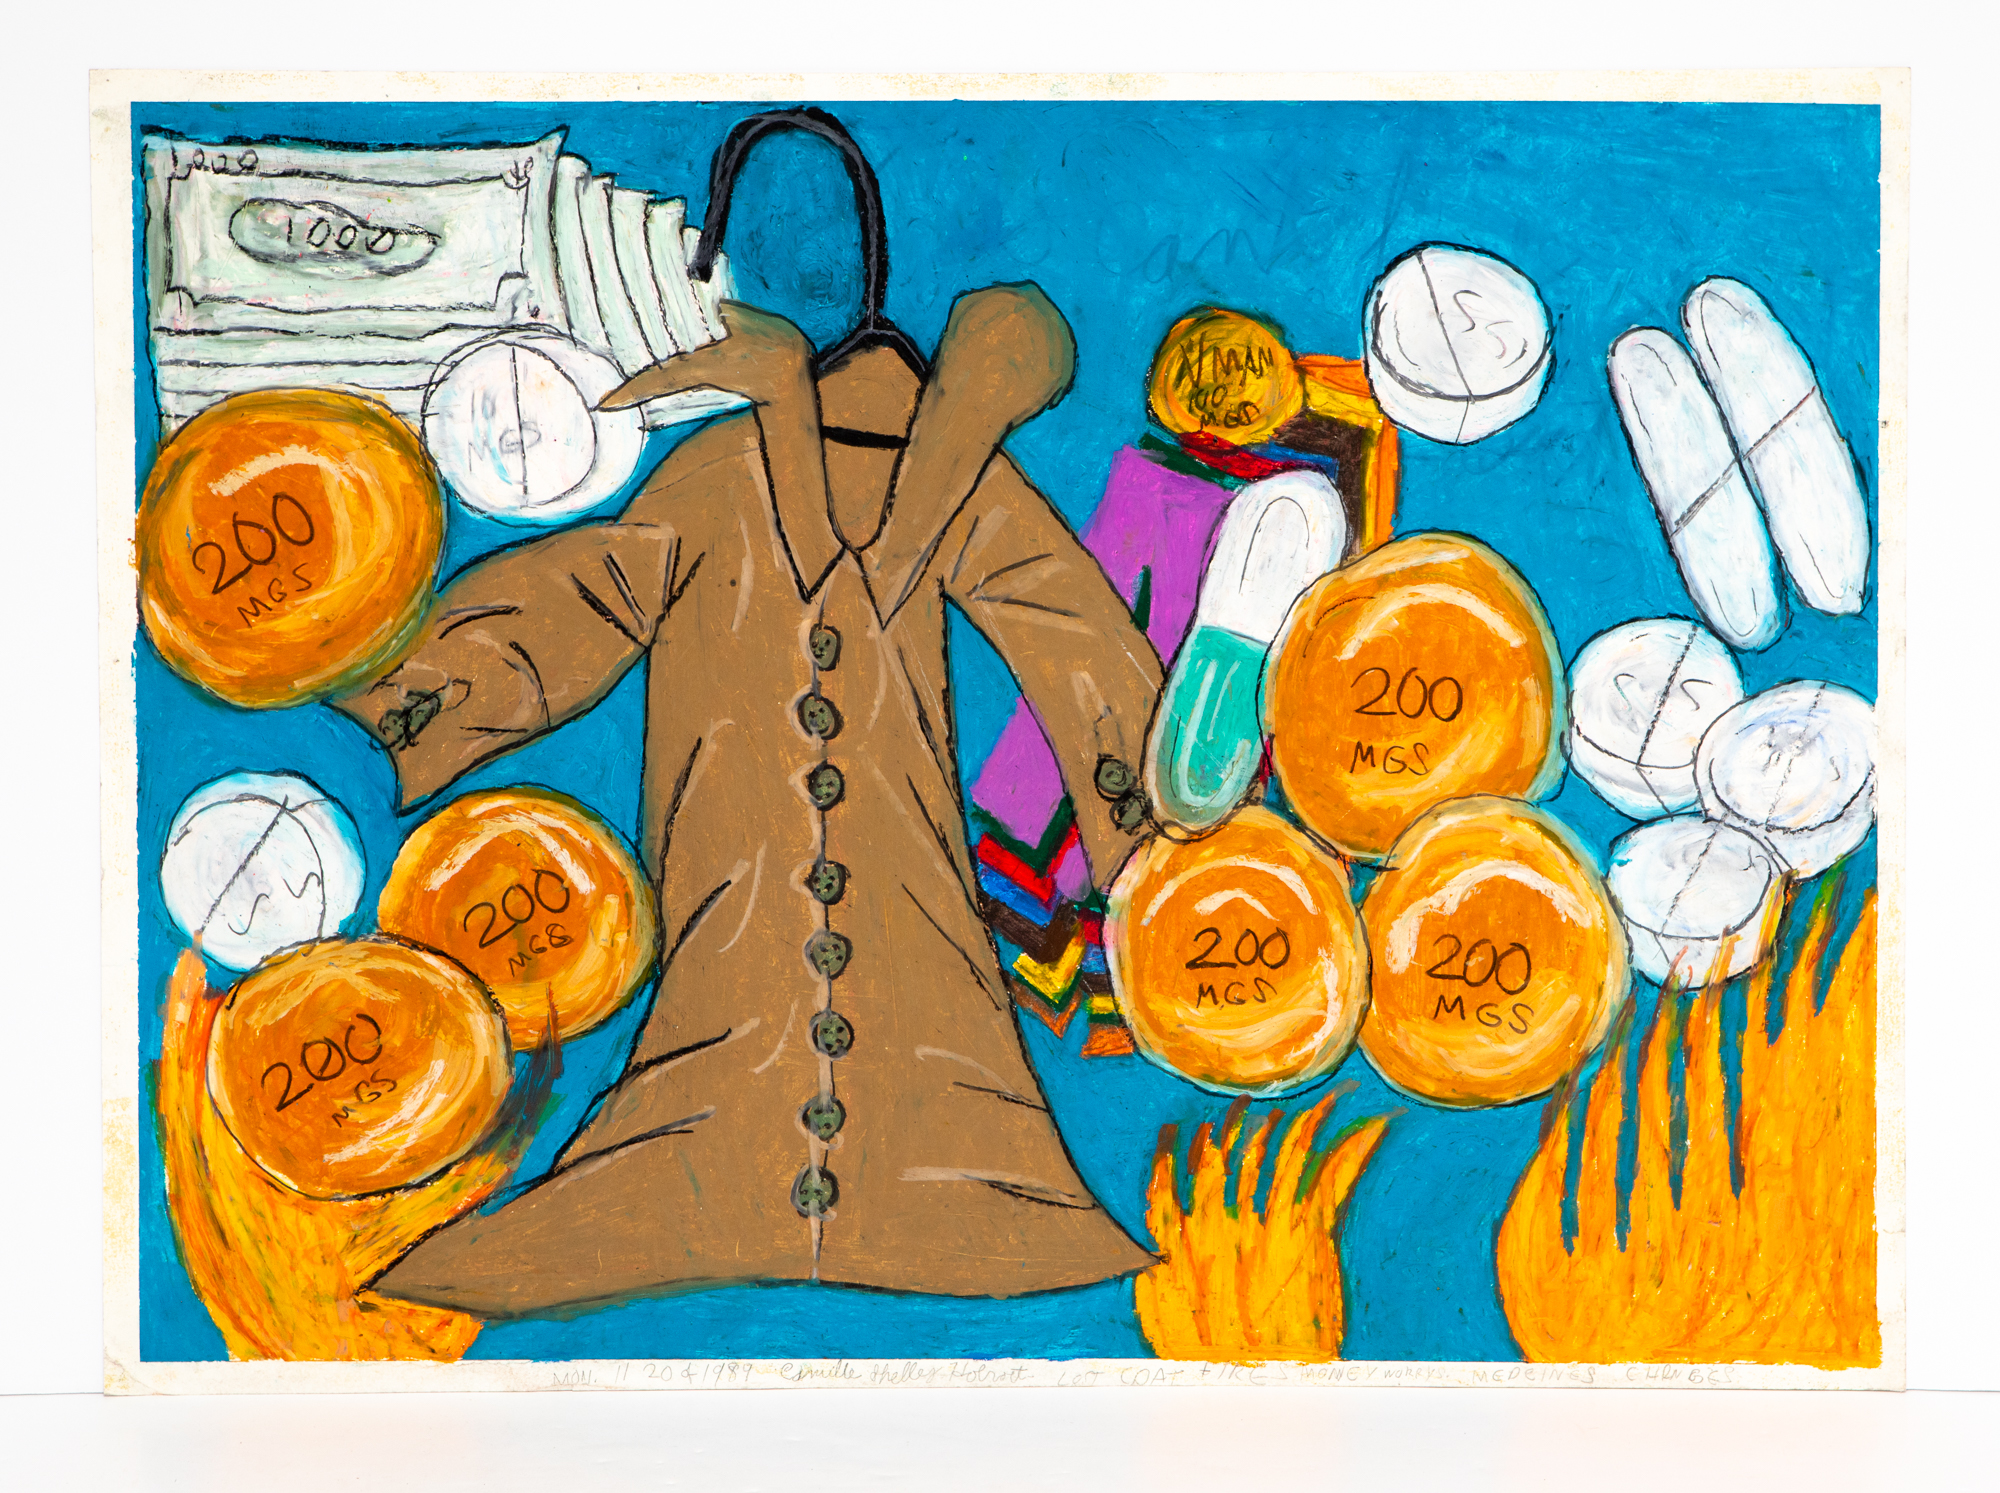 Drawing of pills, money, coal and flames